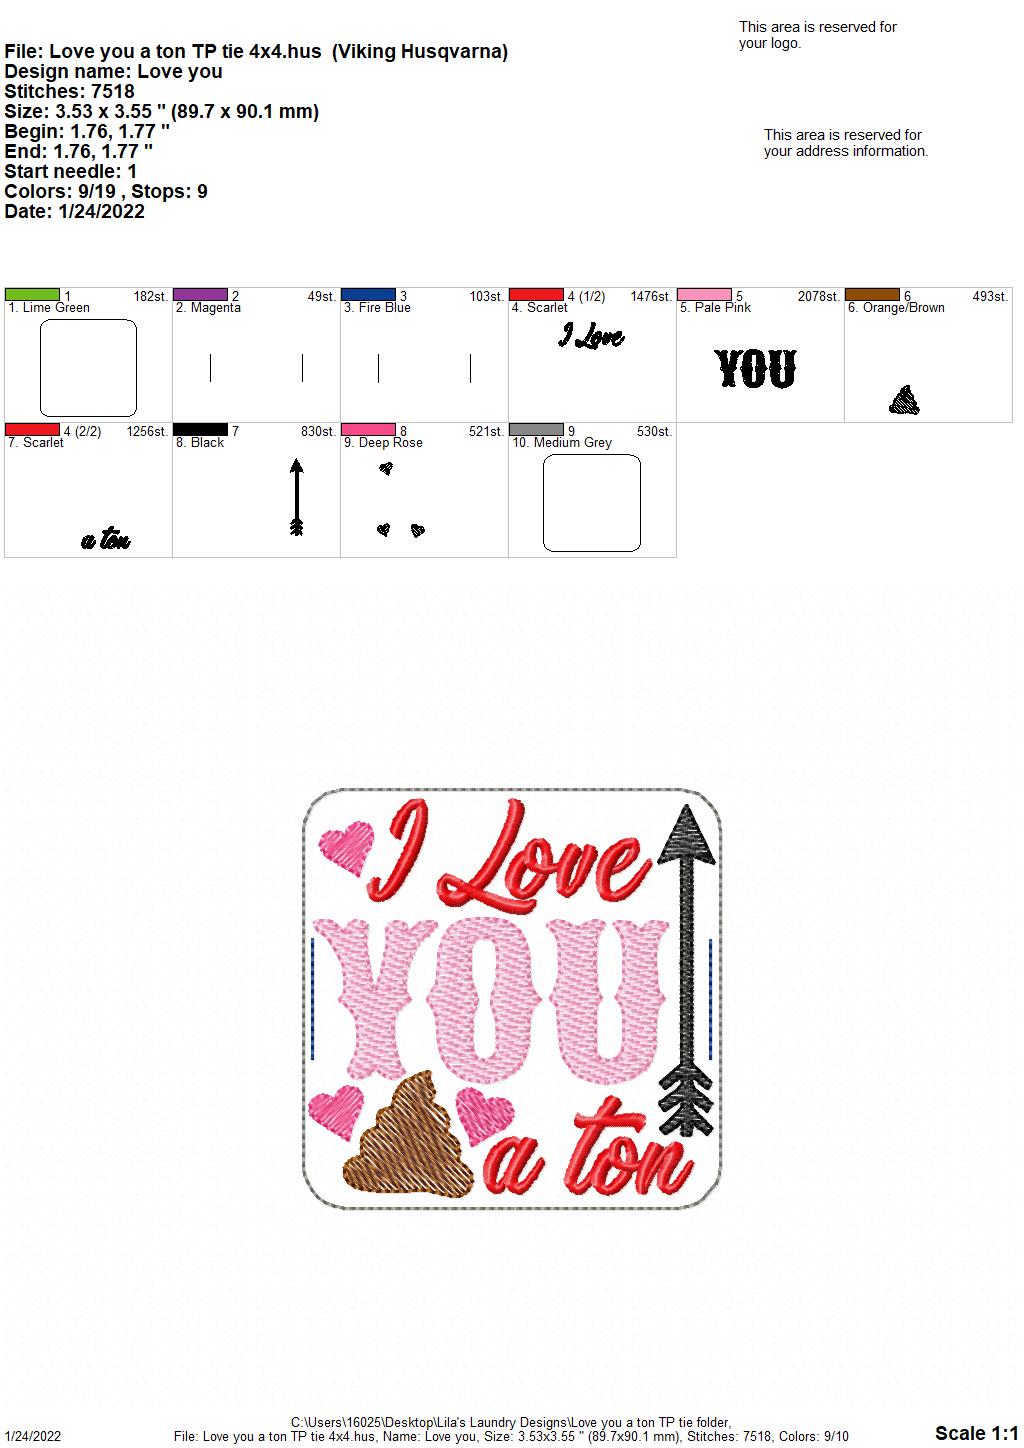 Love You a Ton  - TP tie 4x4 - DIGITAL Embroidery DESIGN